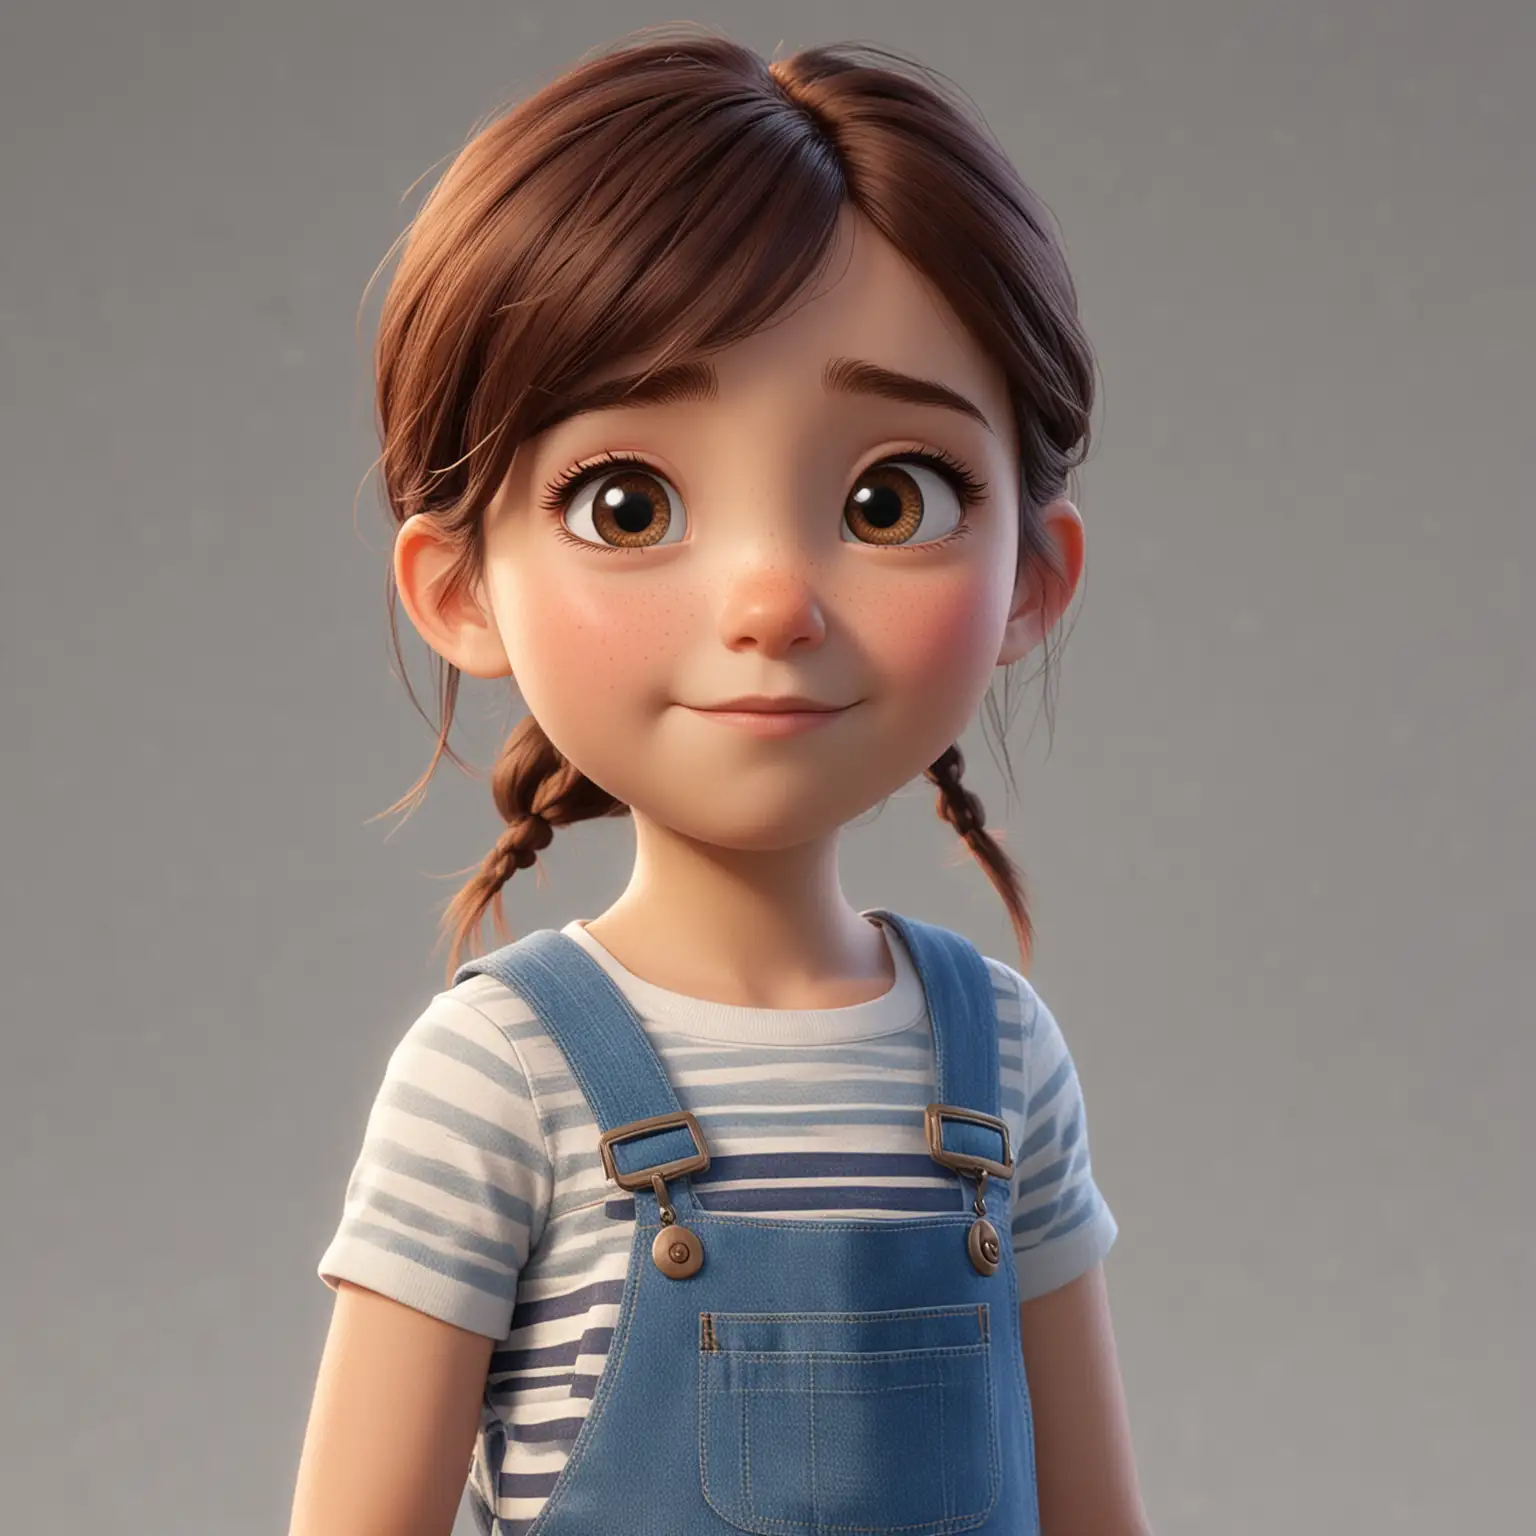 A Pixar animation character of a person . pixar-style, studio anime, Disney, high-quality, hyper detailed, high res, 8k , 4k, raw, masterpiece, award winning